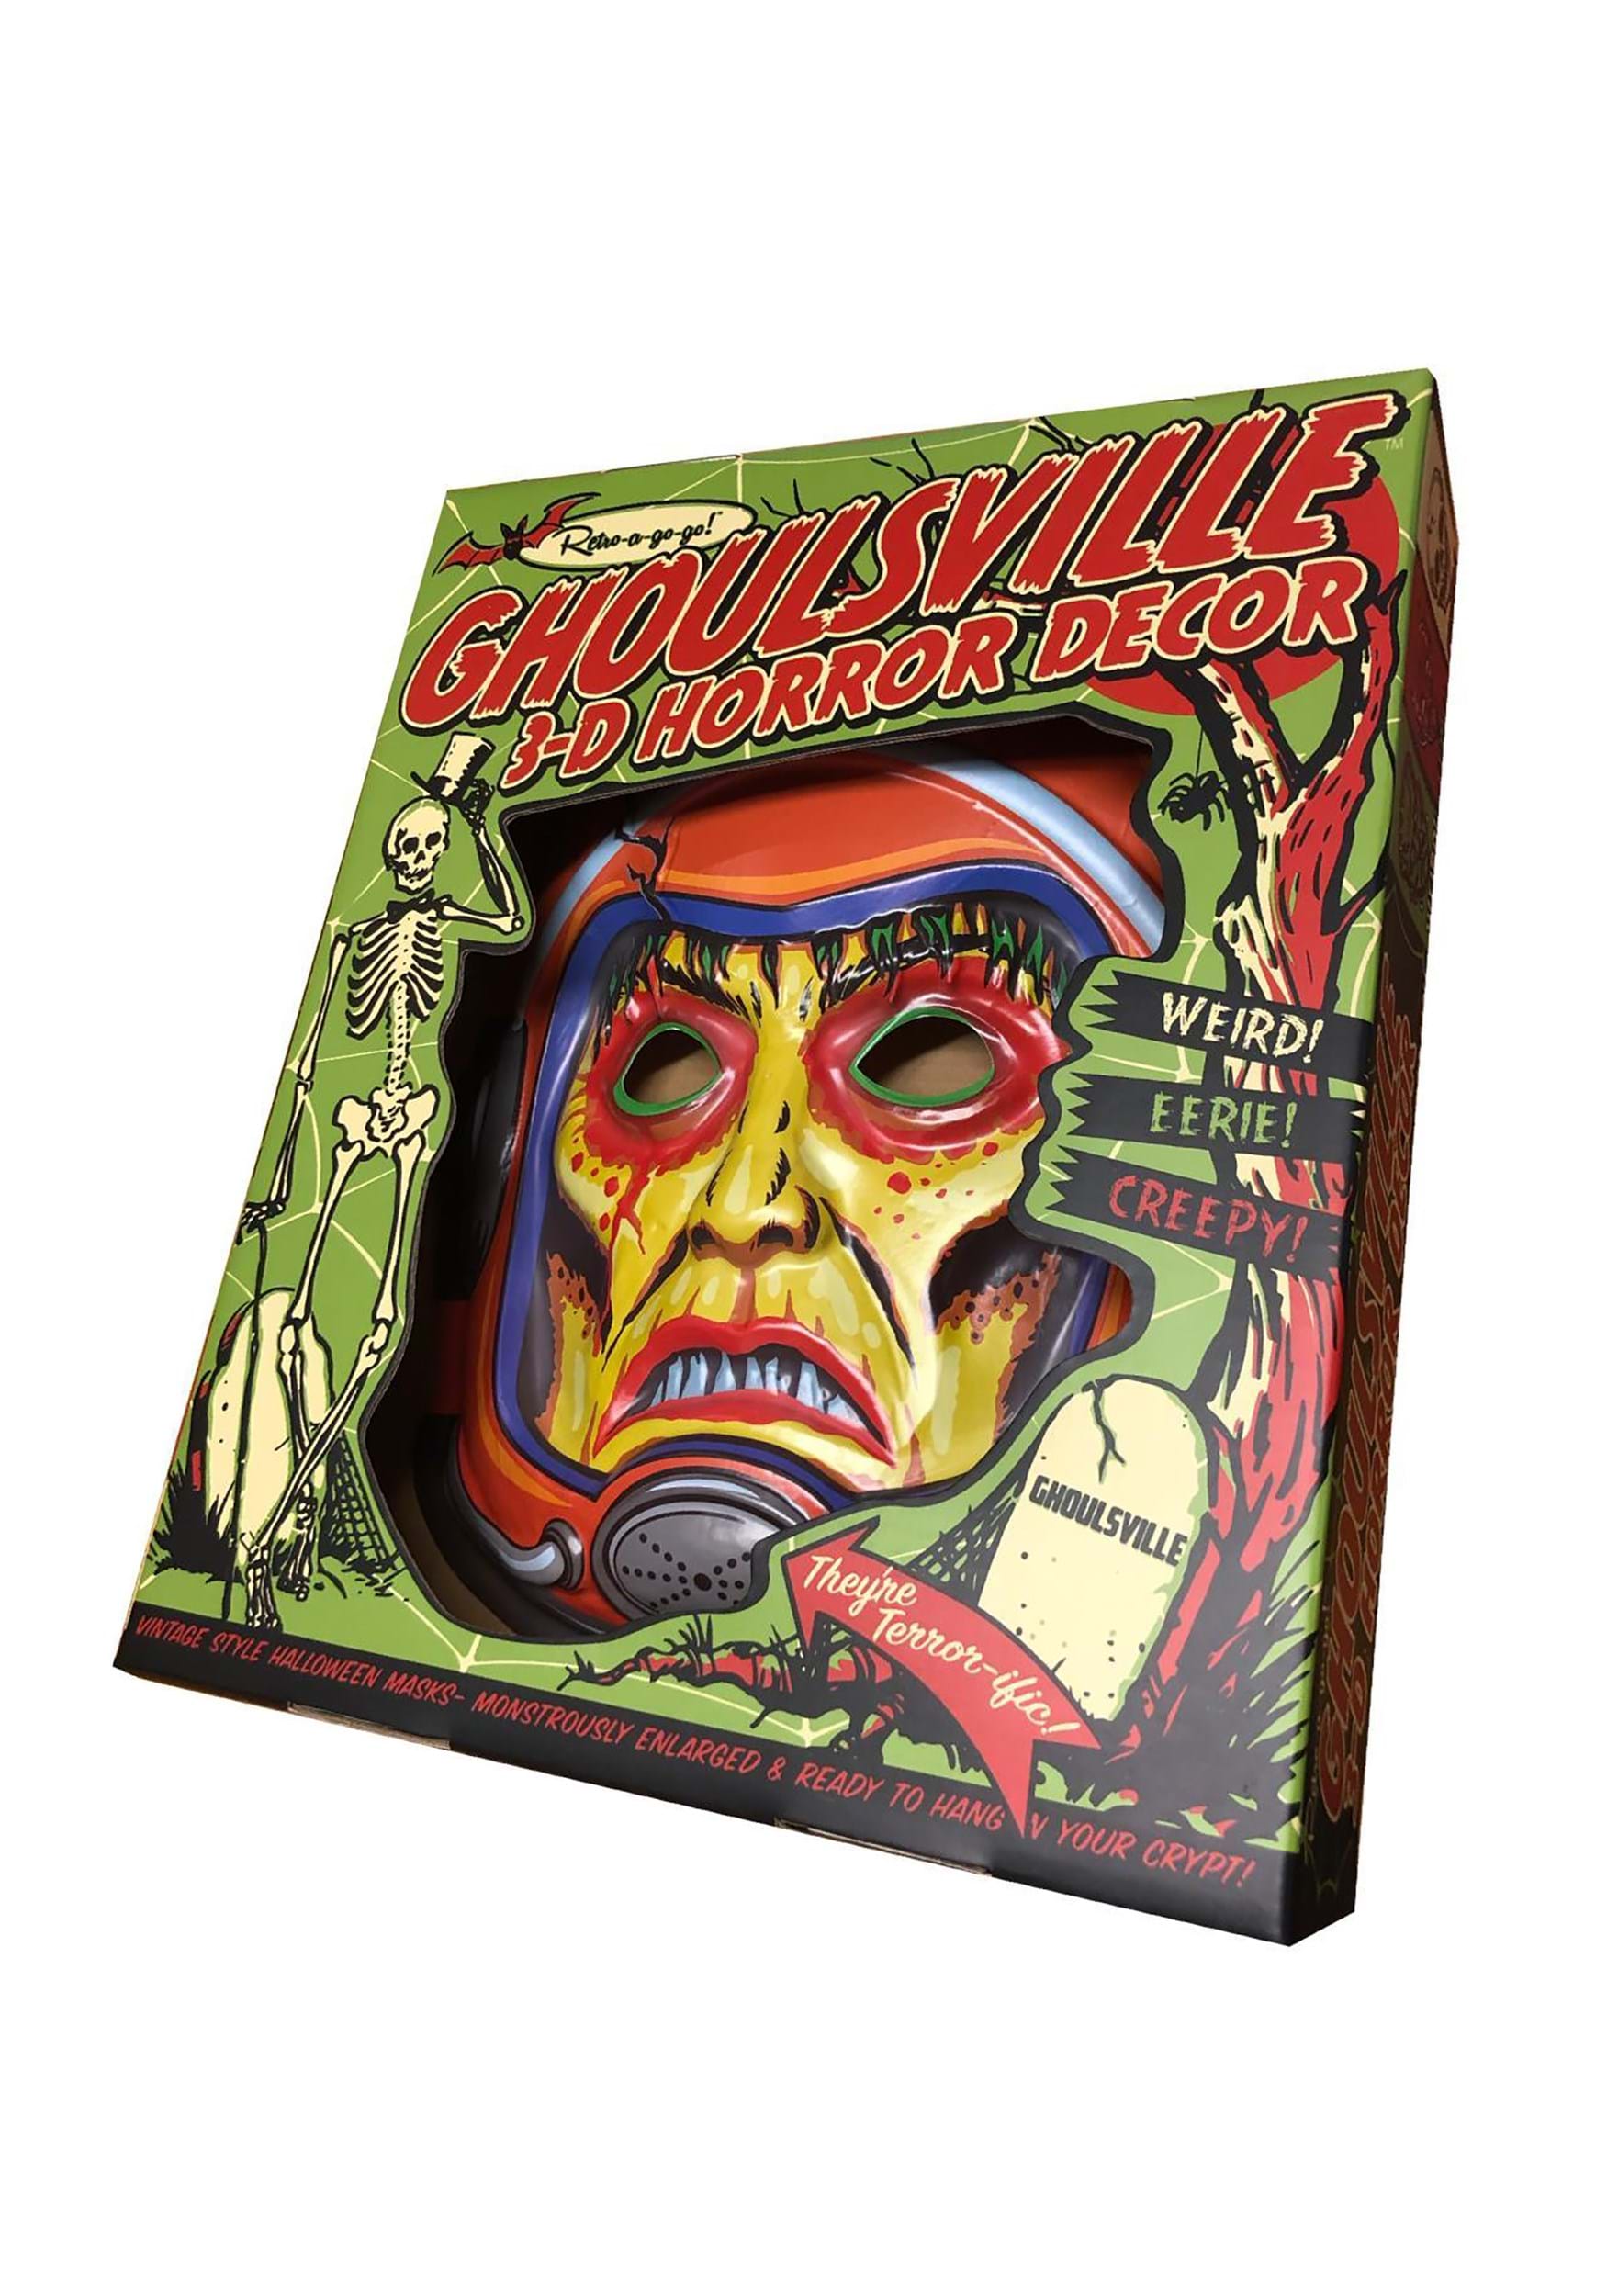 Ghoulsville Classics Space Zombie 2001 - 19" Tall Wall Decor